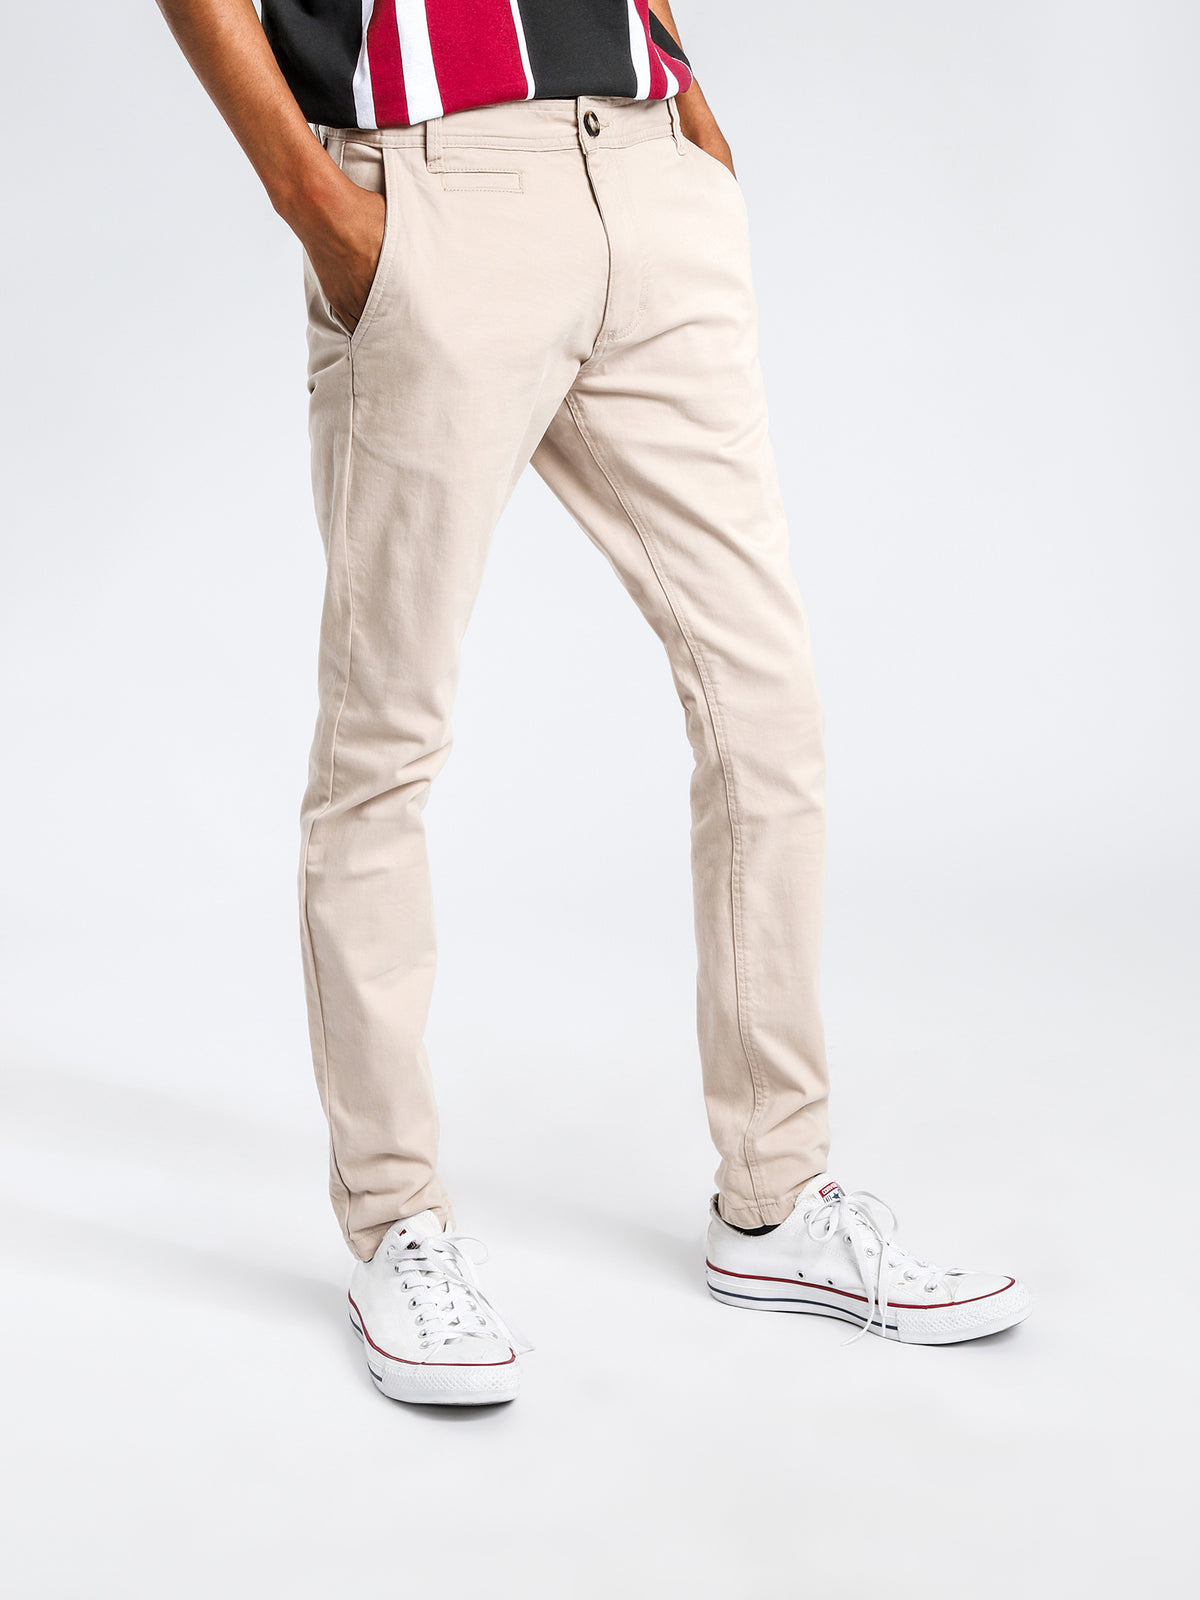 Linden Chino Pants in Stone